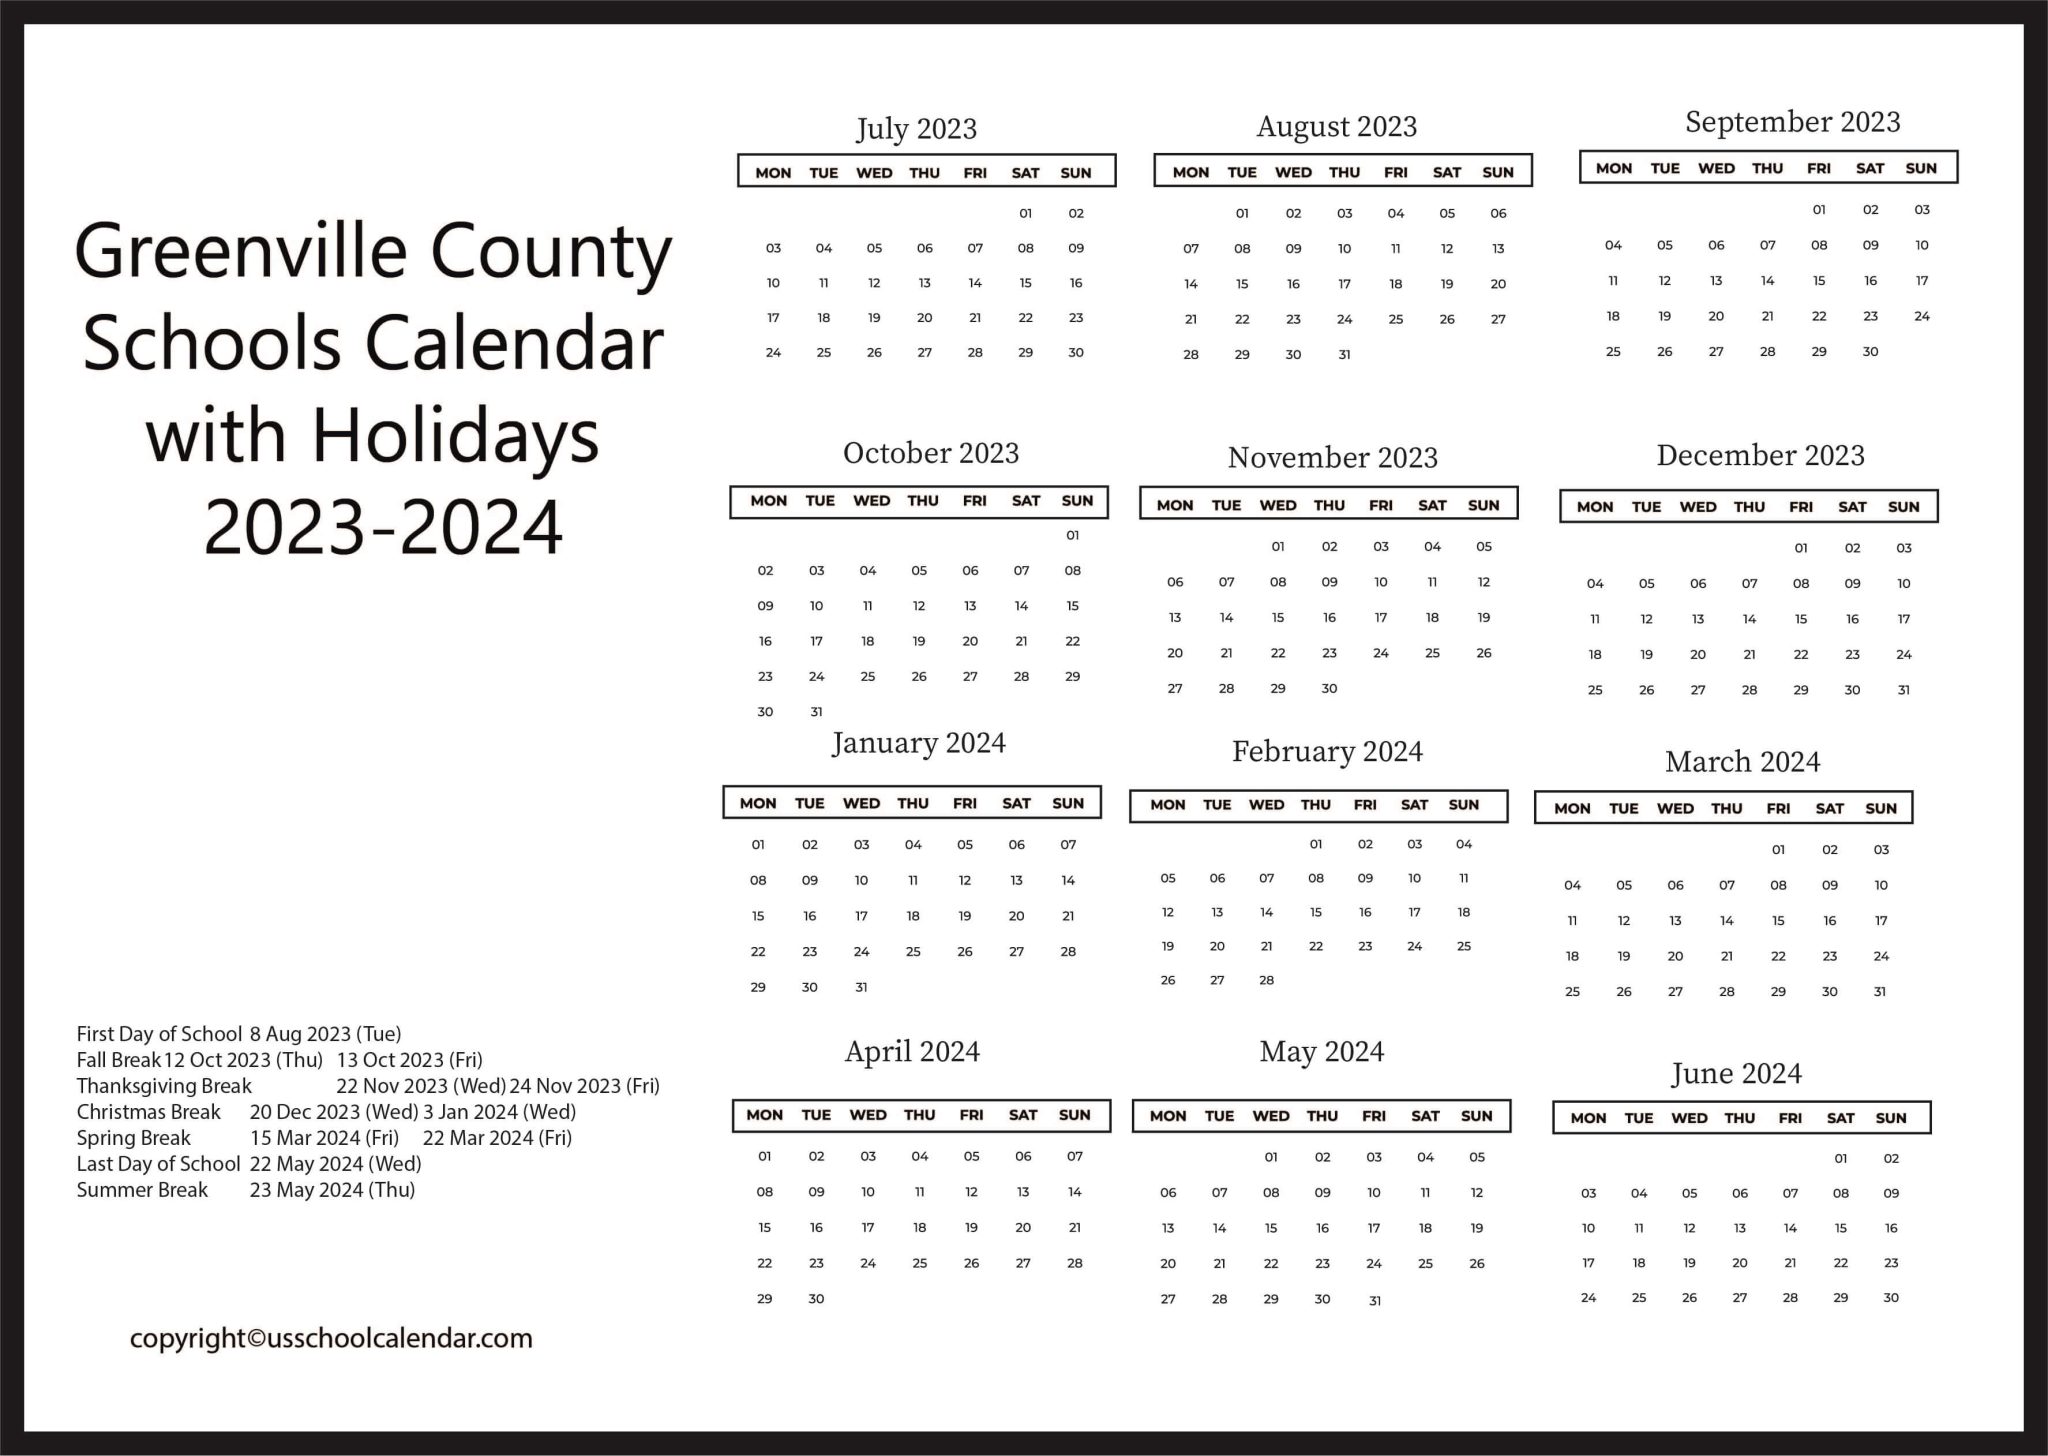 Greenville County Schools Calendar with Holidays 20232024